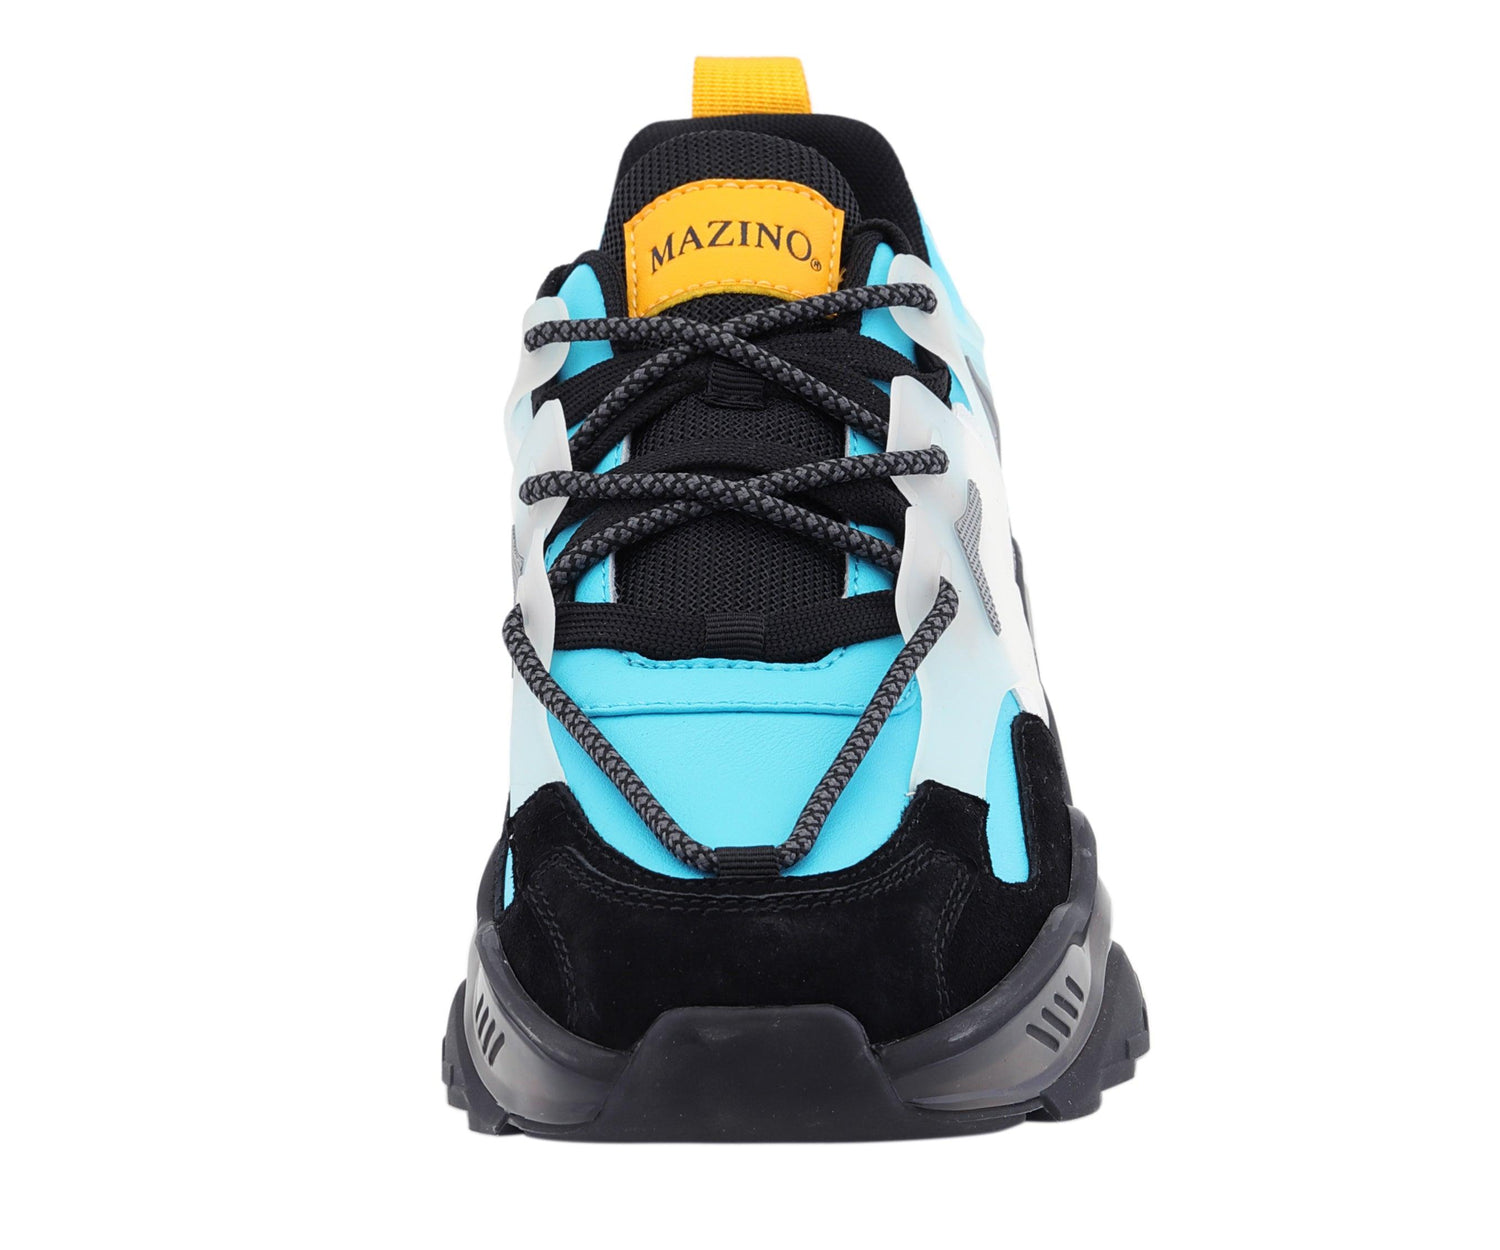 mens turquoise sneakers